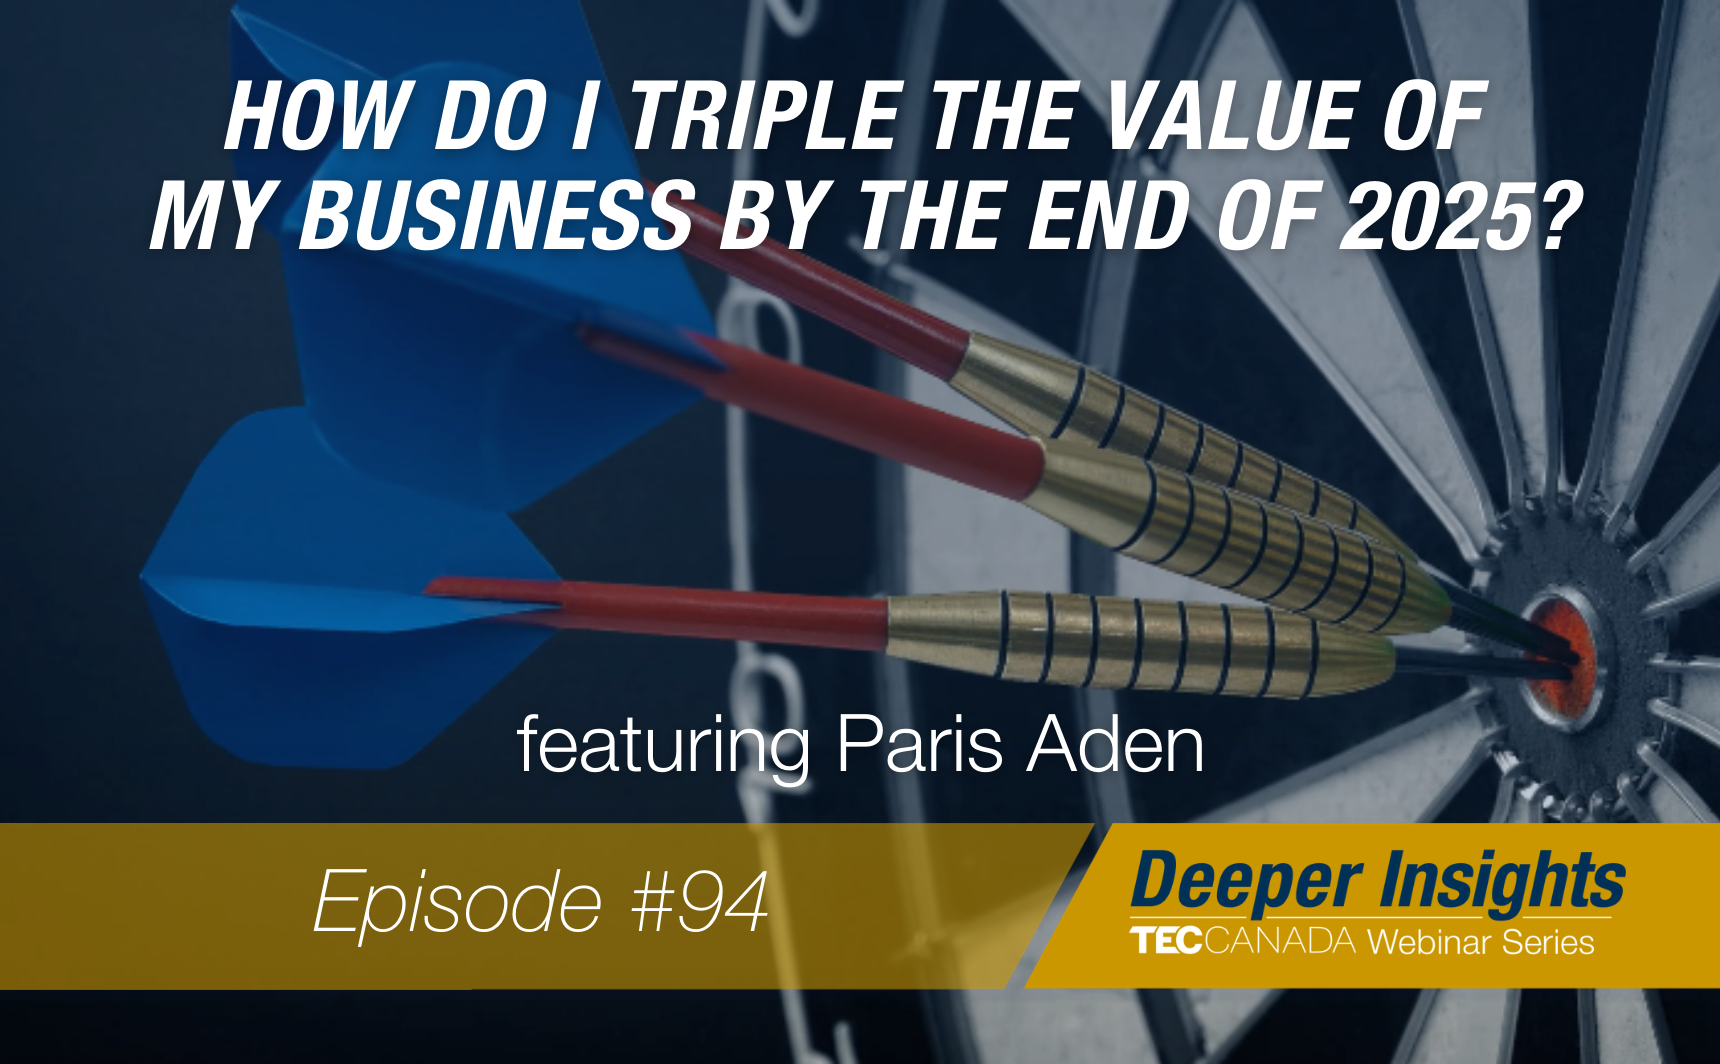 How Do I Triple the Value of My Business by the end of 2025?